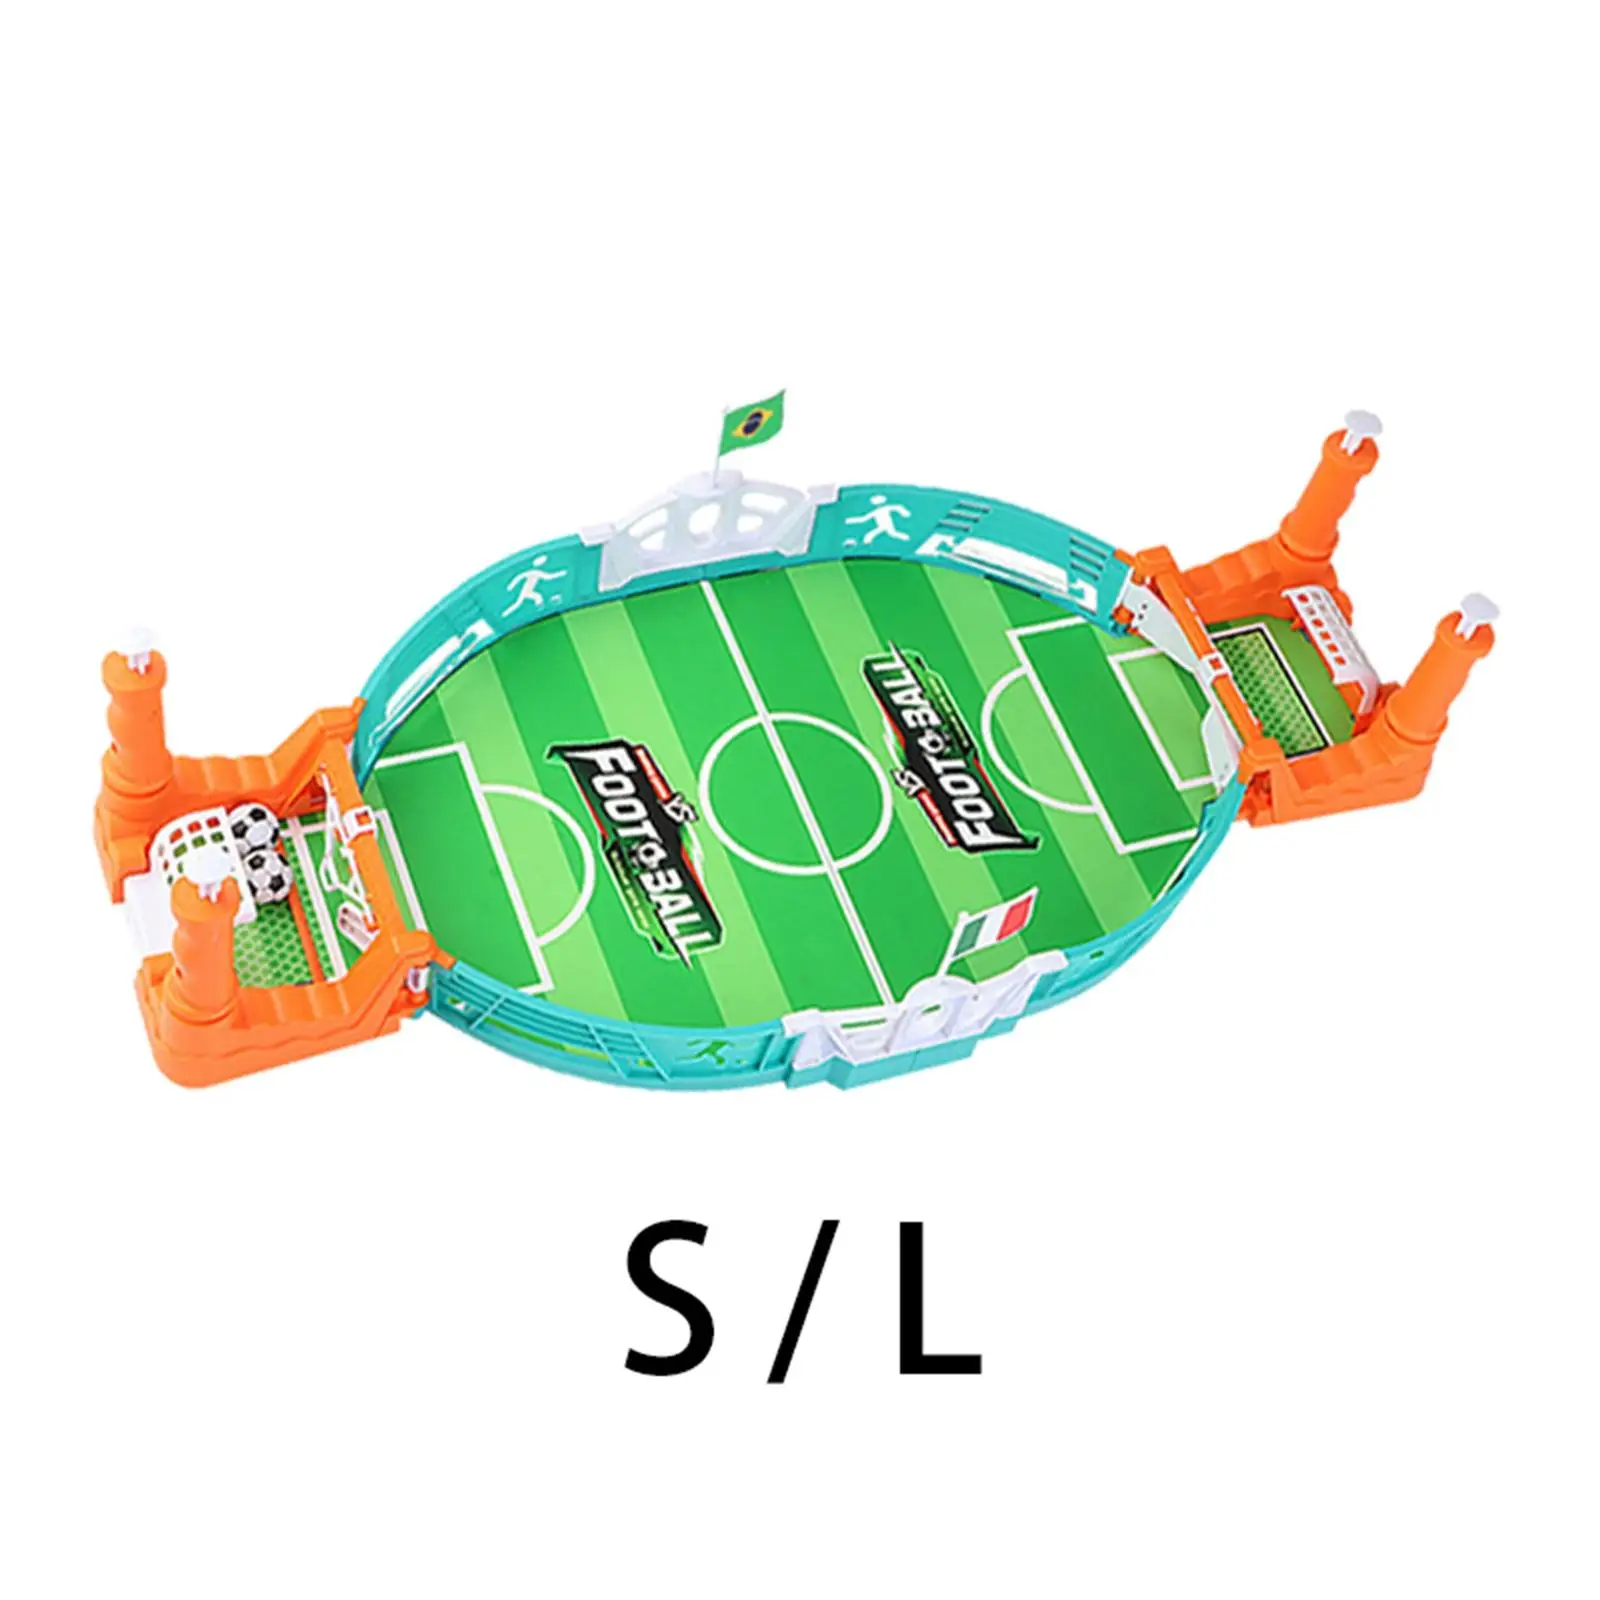  Top Football Game, Family Game Competitive Soccer Games for Children Kids Birthday Gifts